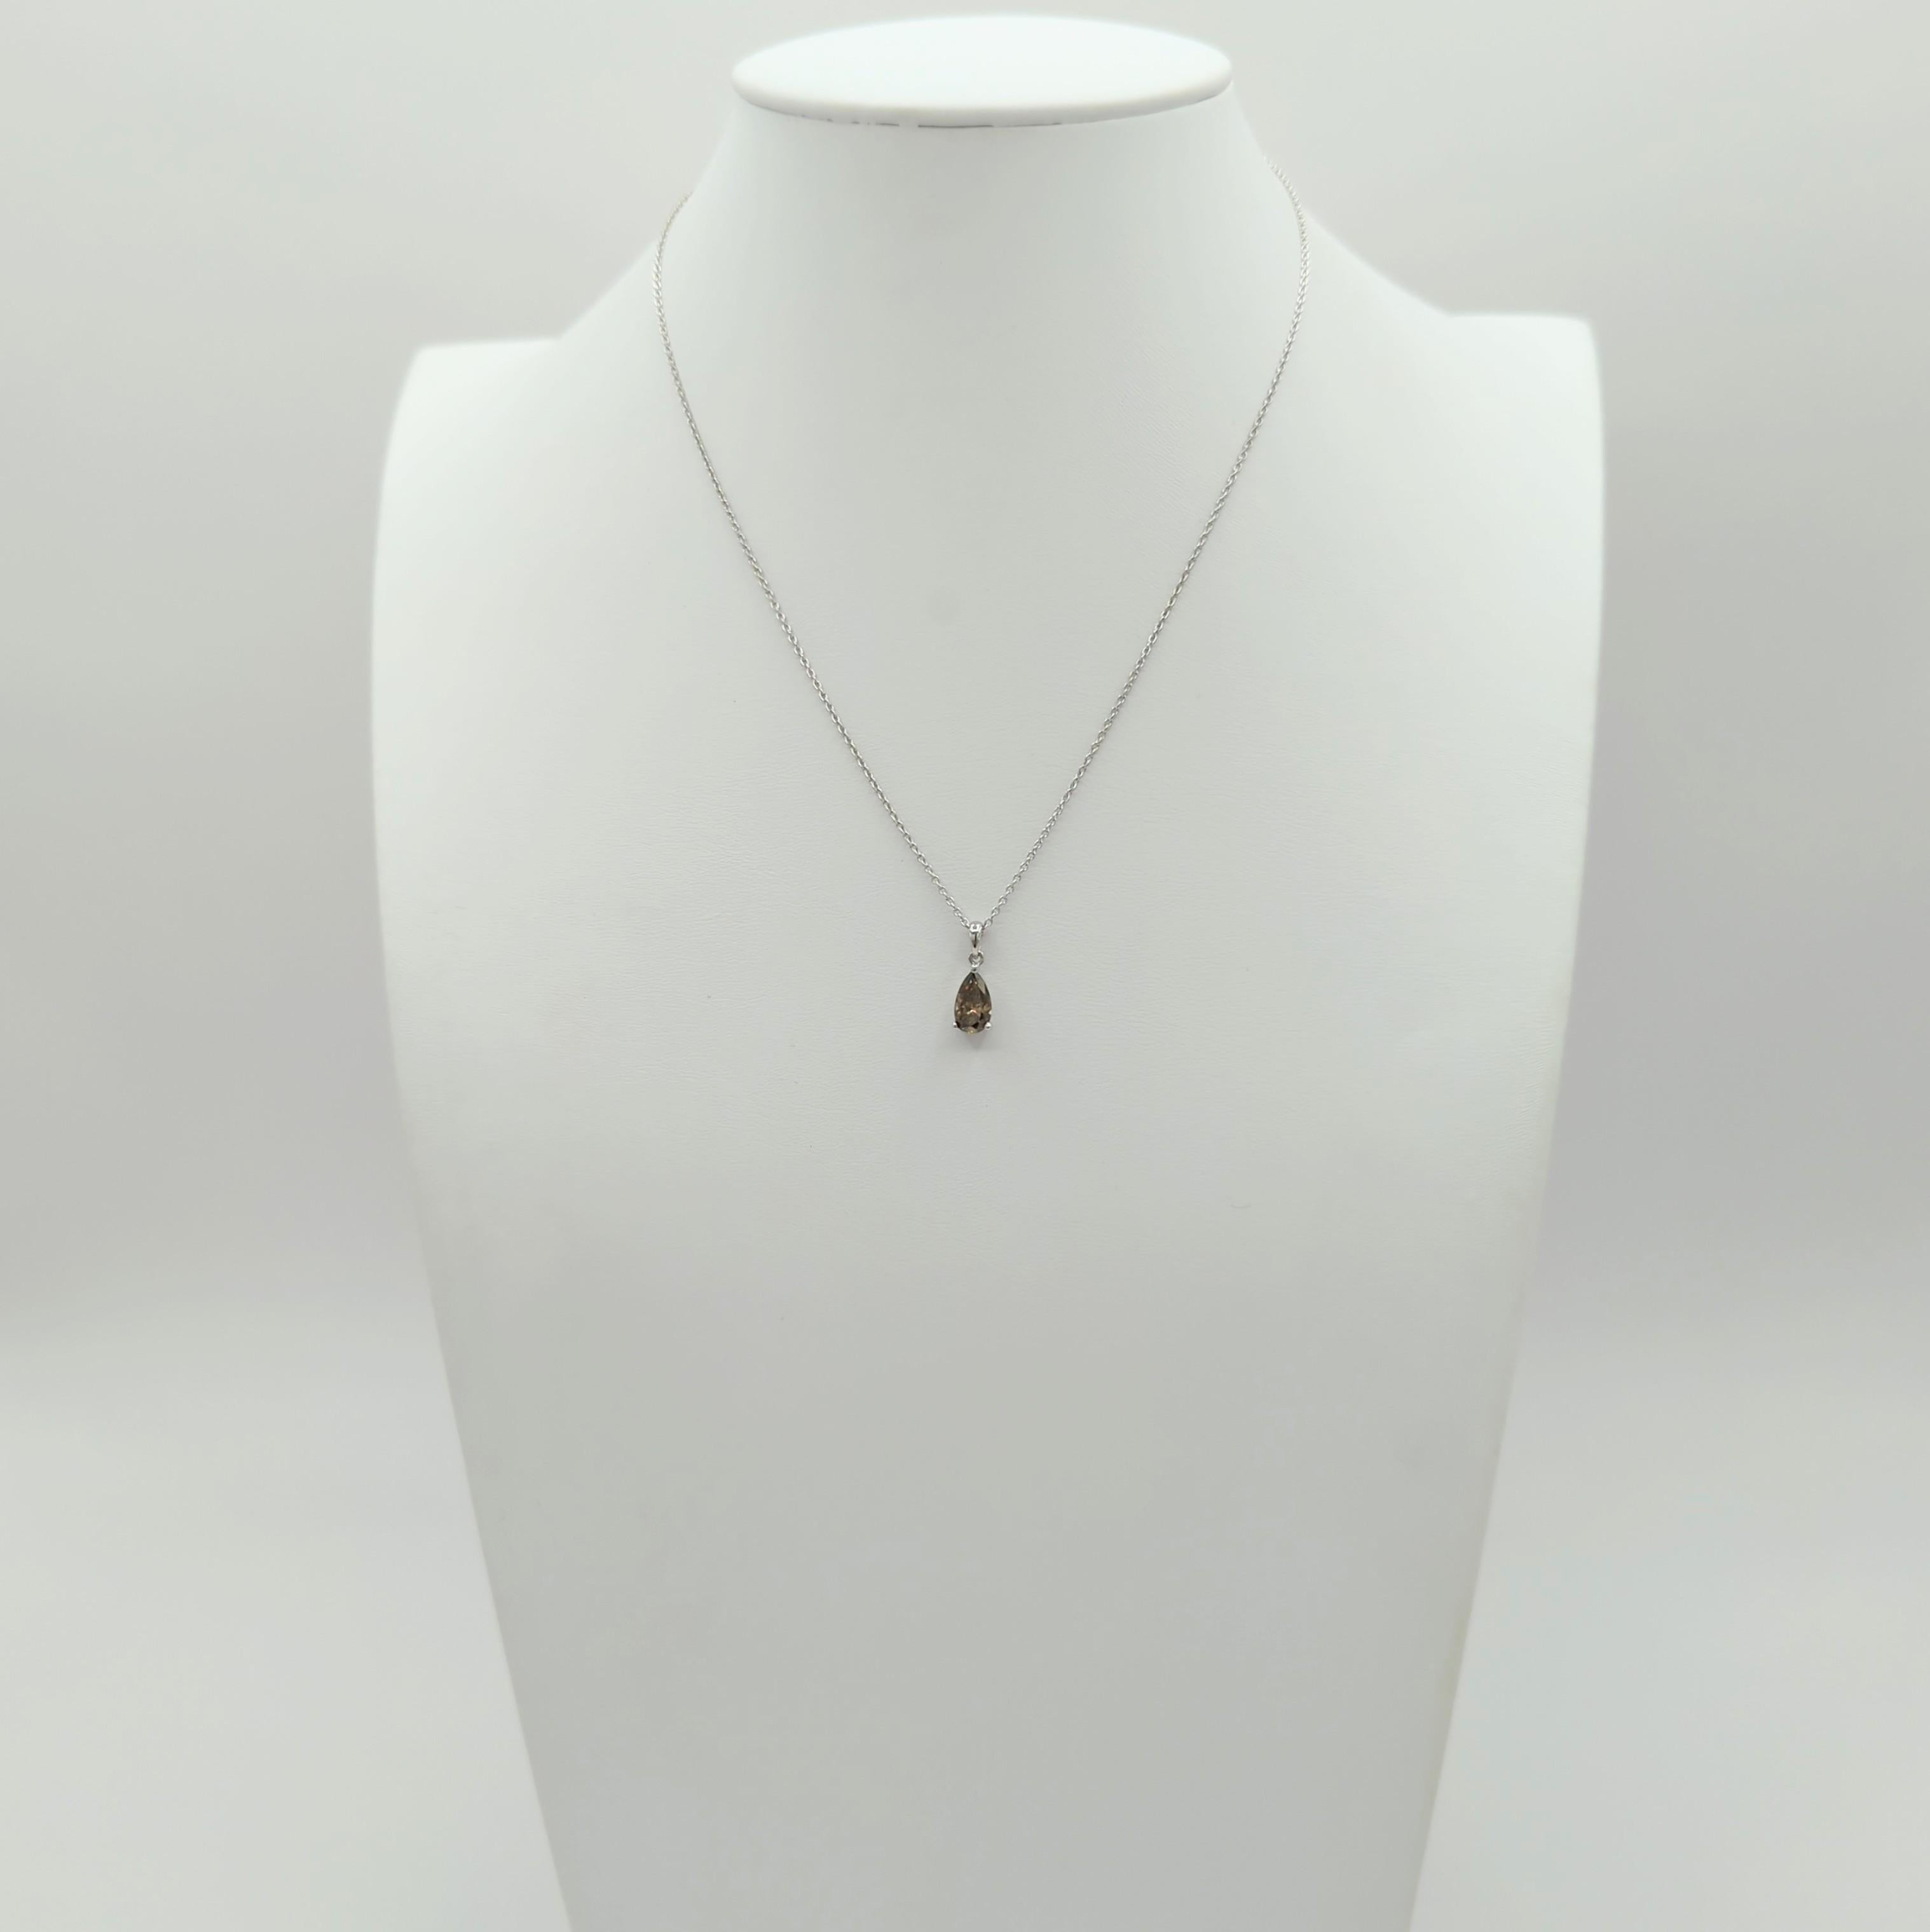 Champagne Diamond Pendant Necklace in 18K White Gold In New Condition For Sale In Los Angeles, CA